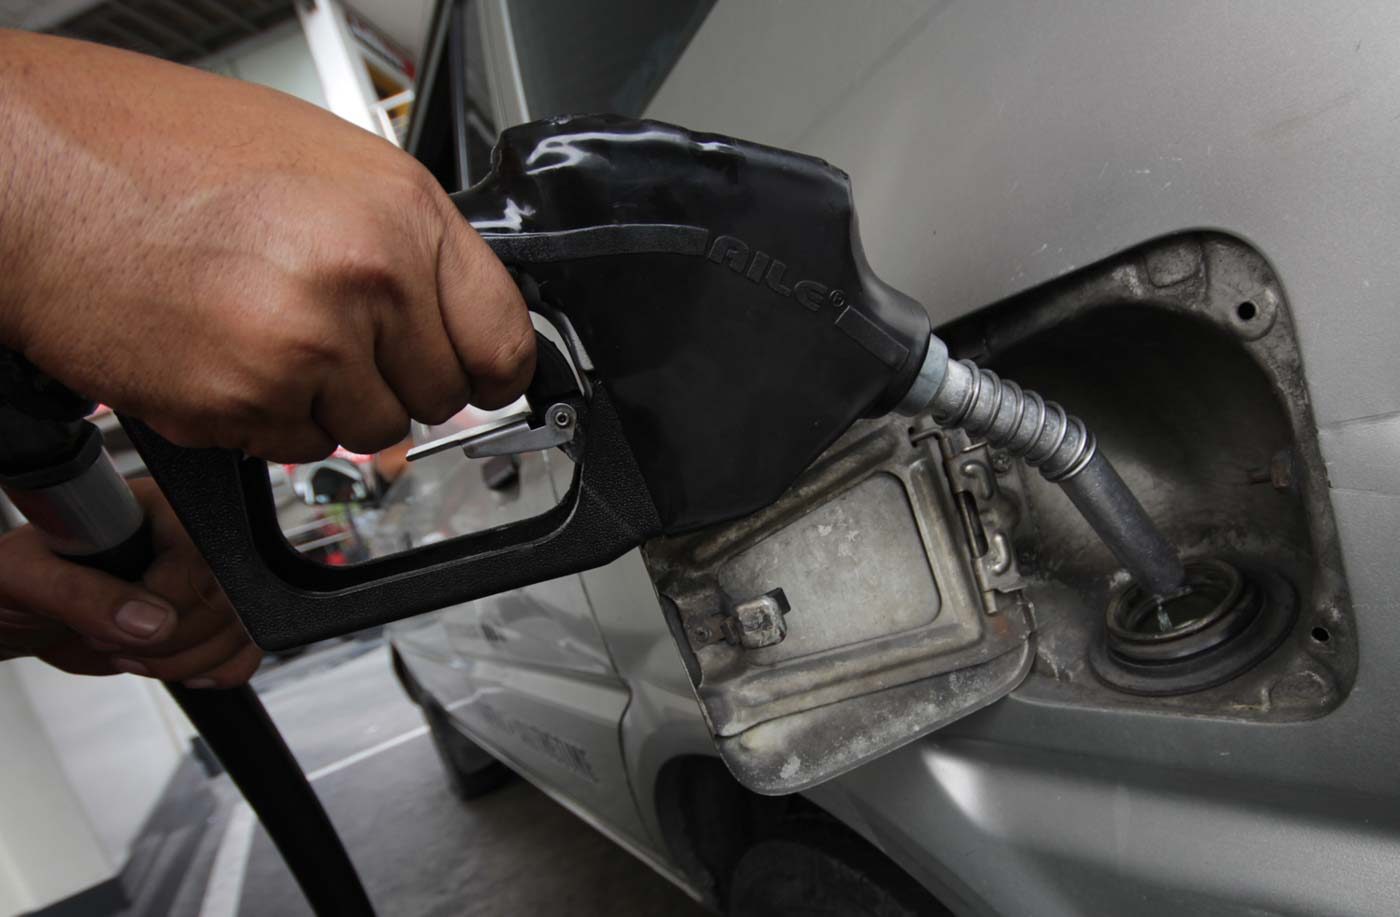 After 3 rollbacks, oil prices going up on June 18